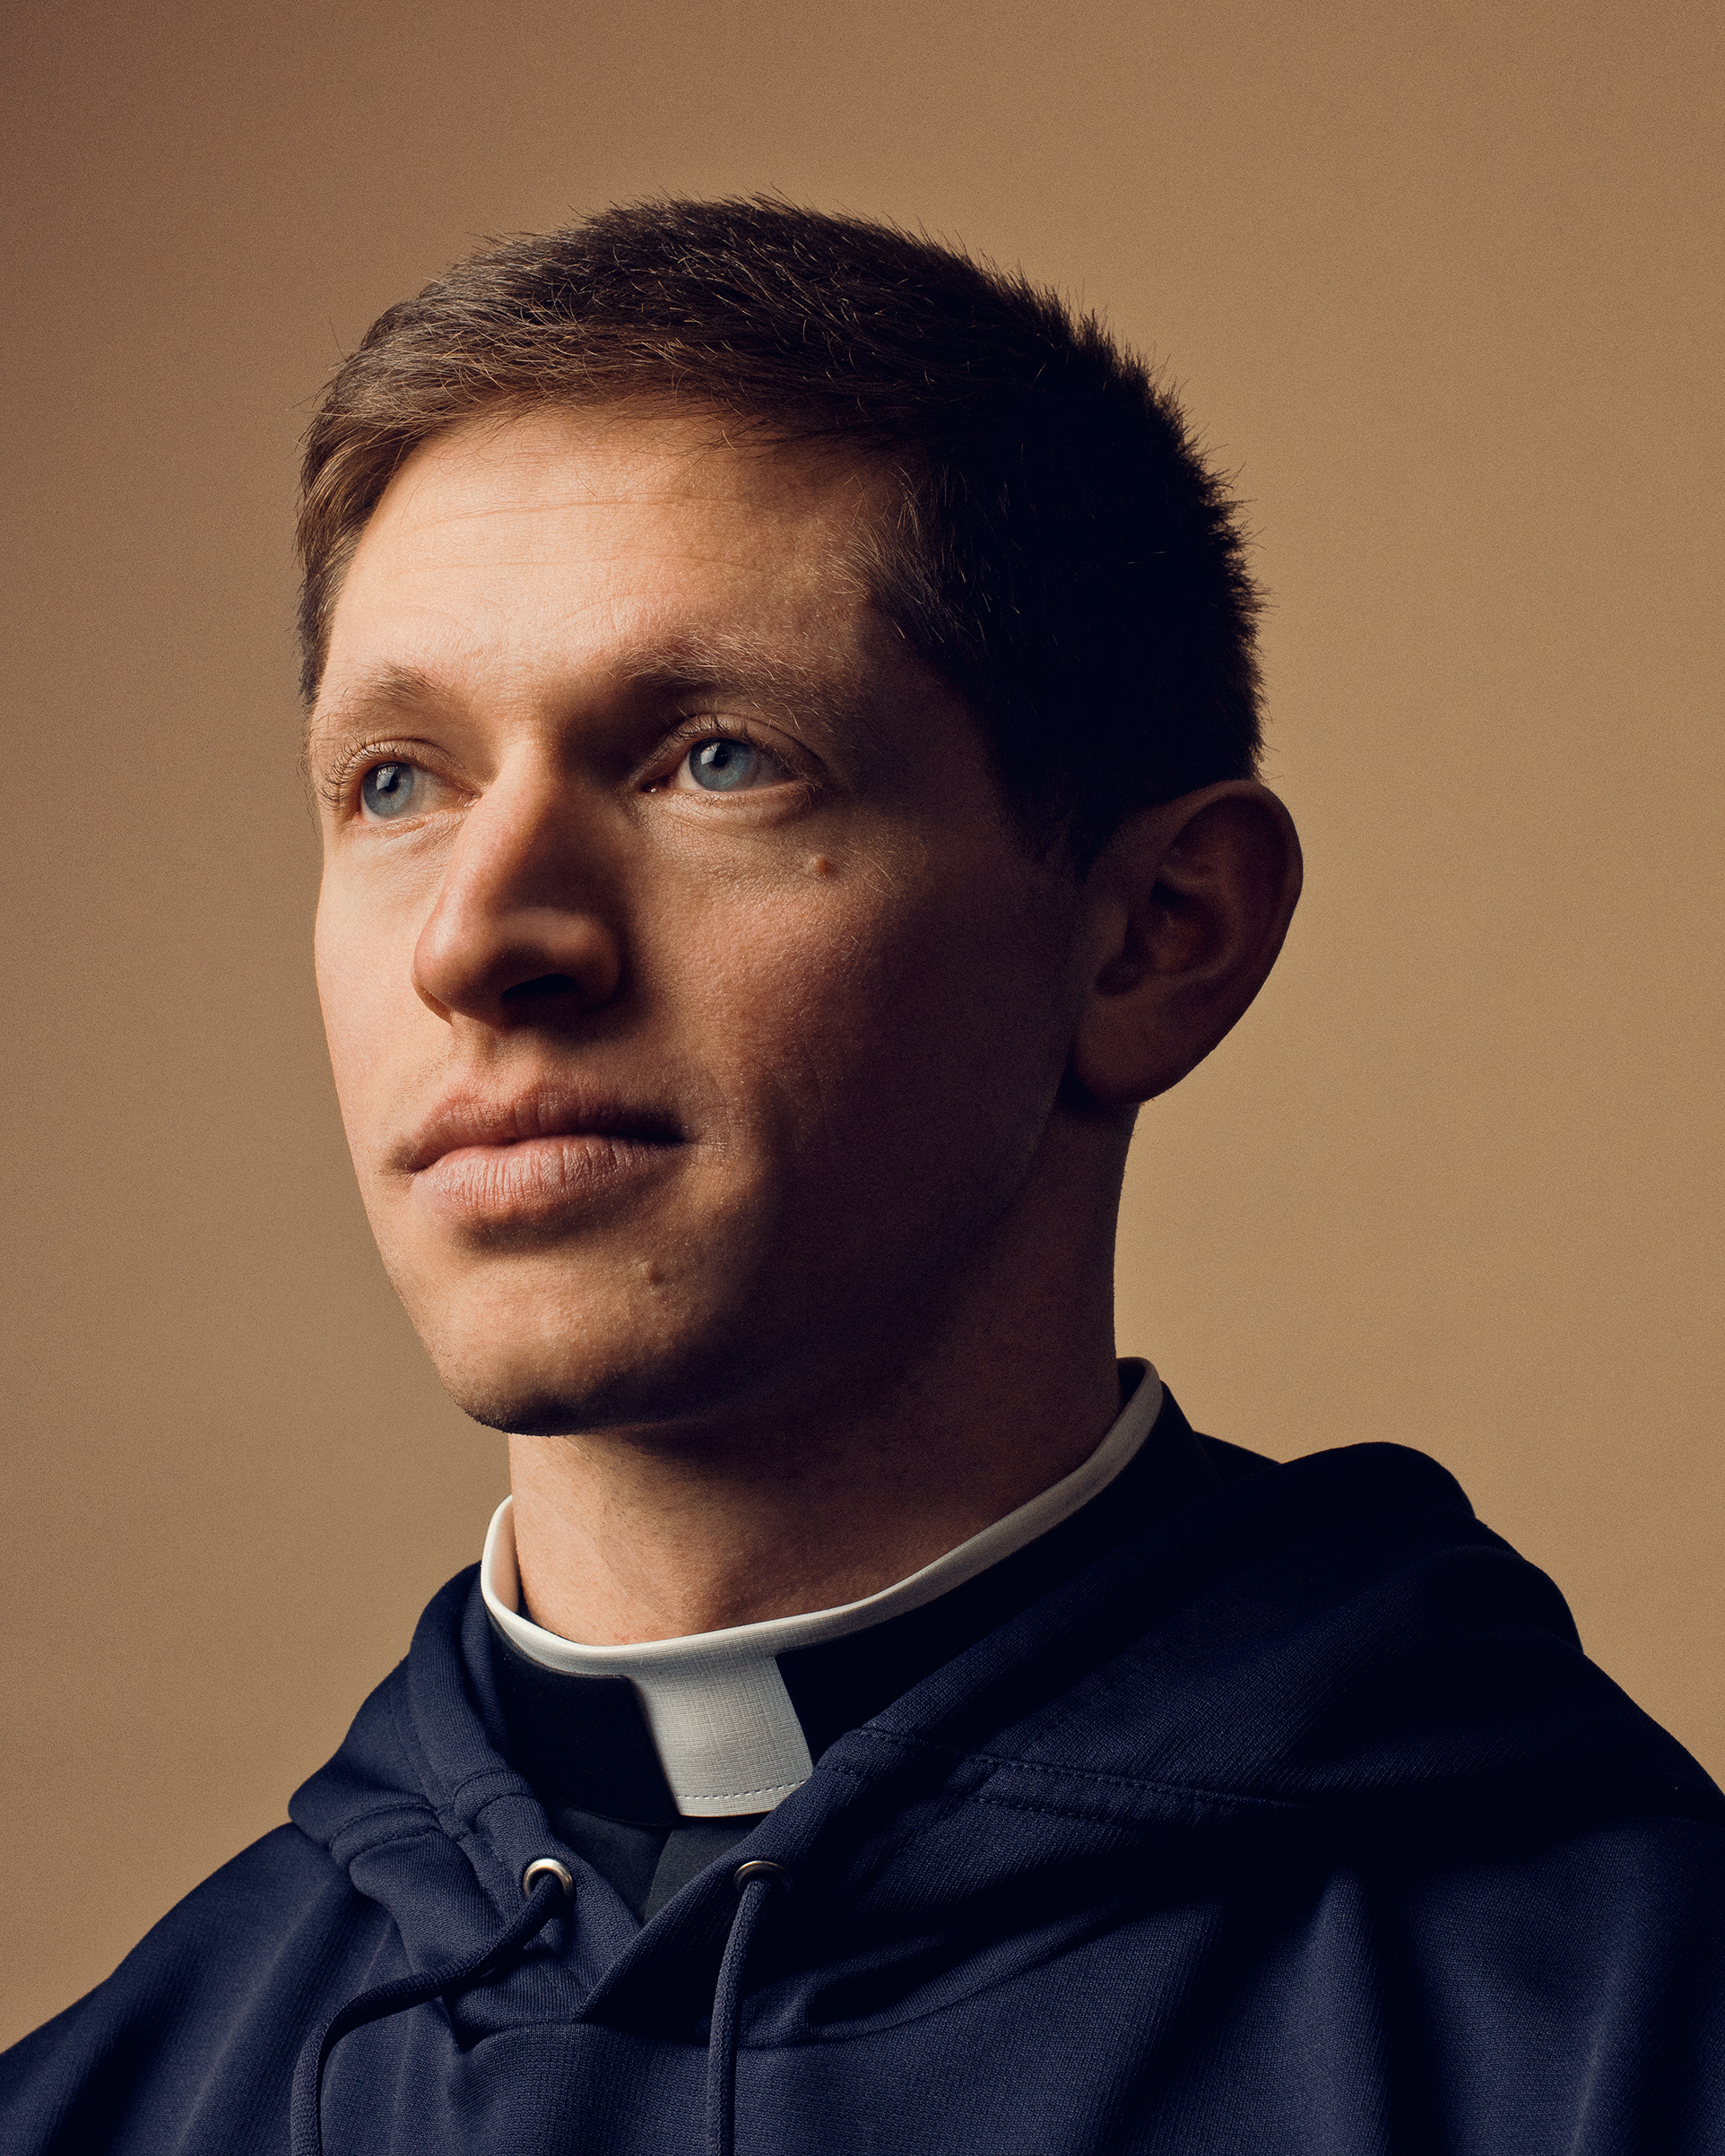 Parochial vicar of Our Lady of Mercy Church in Potomac, Md., Father Chris Seith, 28, admires the simple life that Pope Francis praises